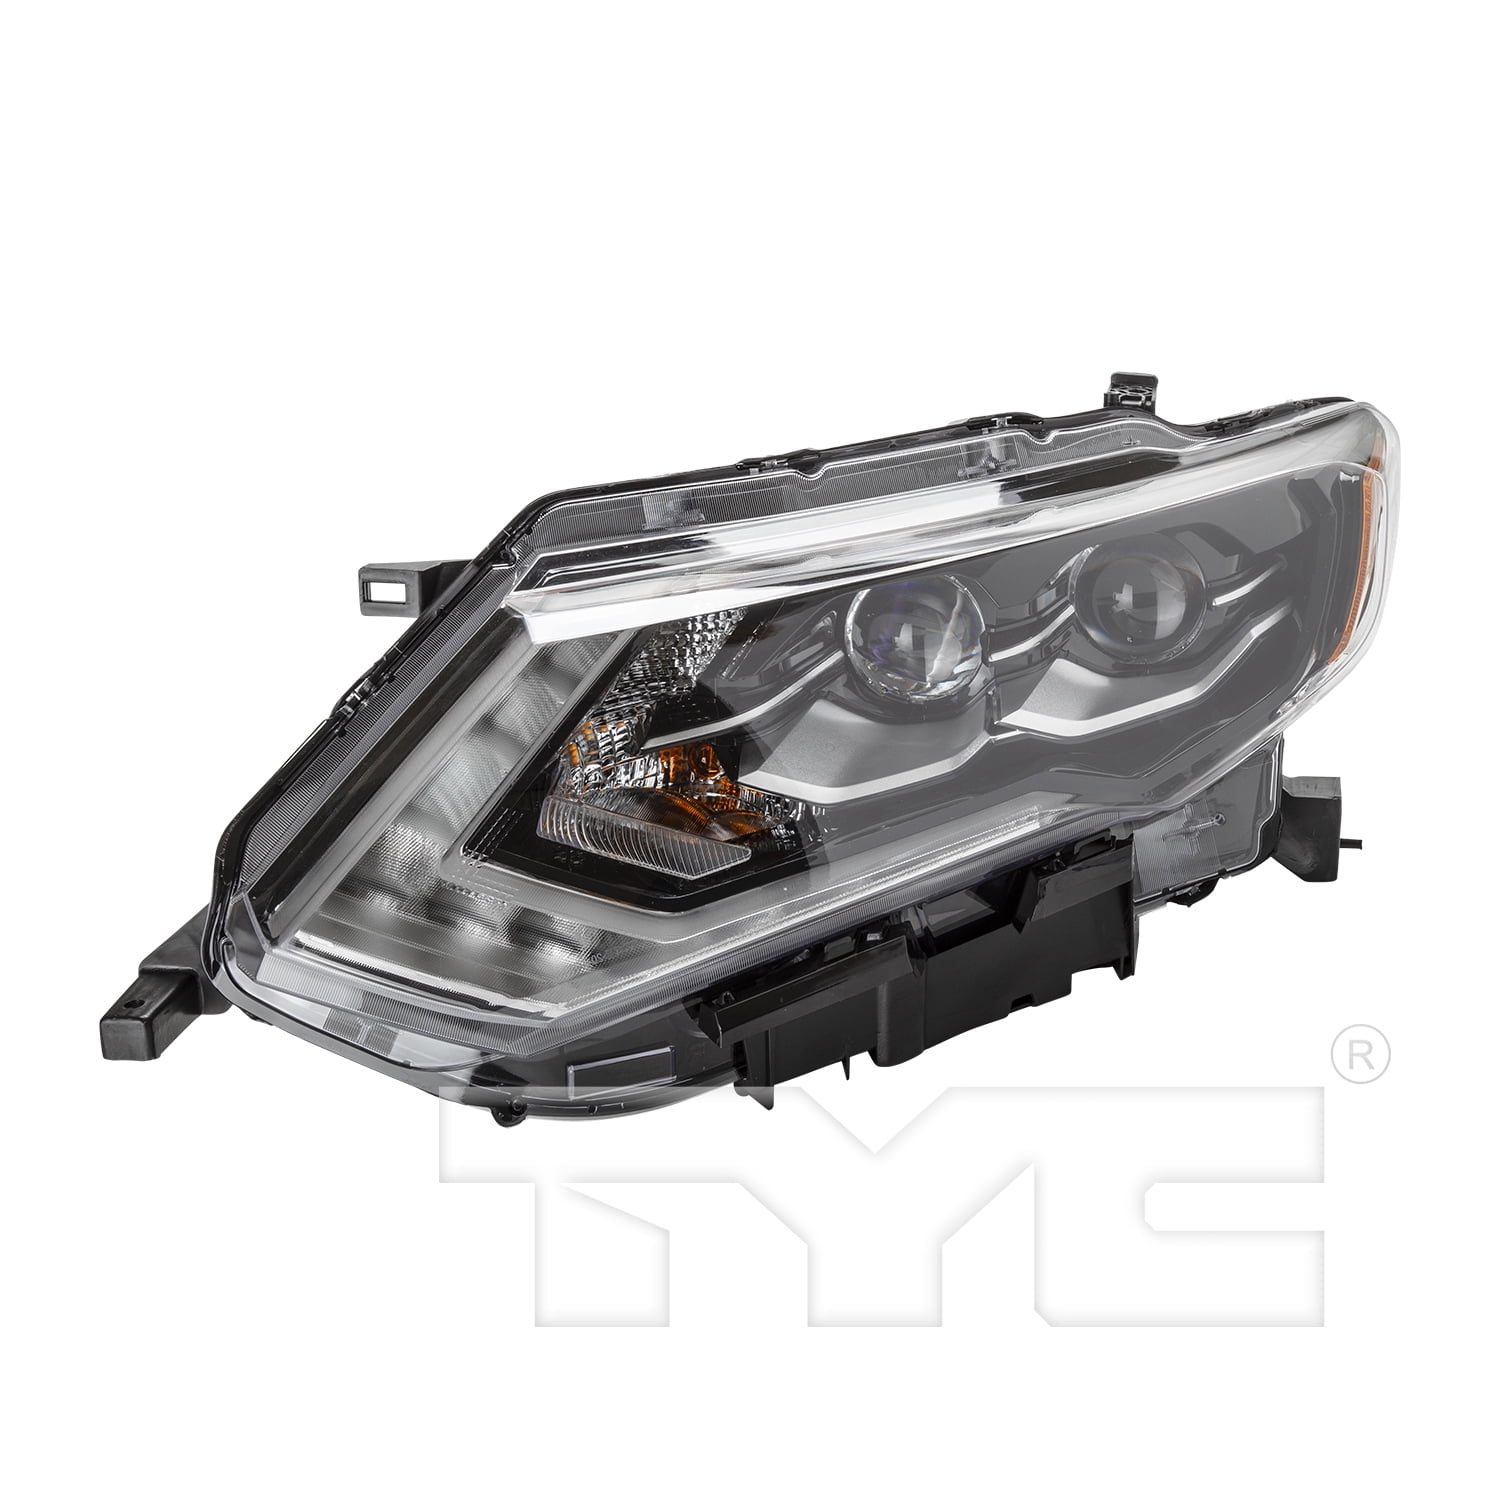 Headlight Front Lamp for 17-18 Nissan Rogue LED Right Passenger